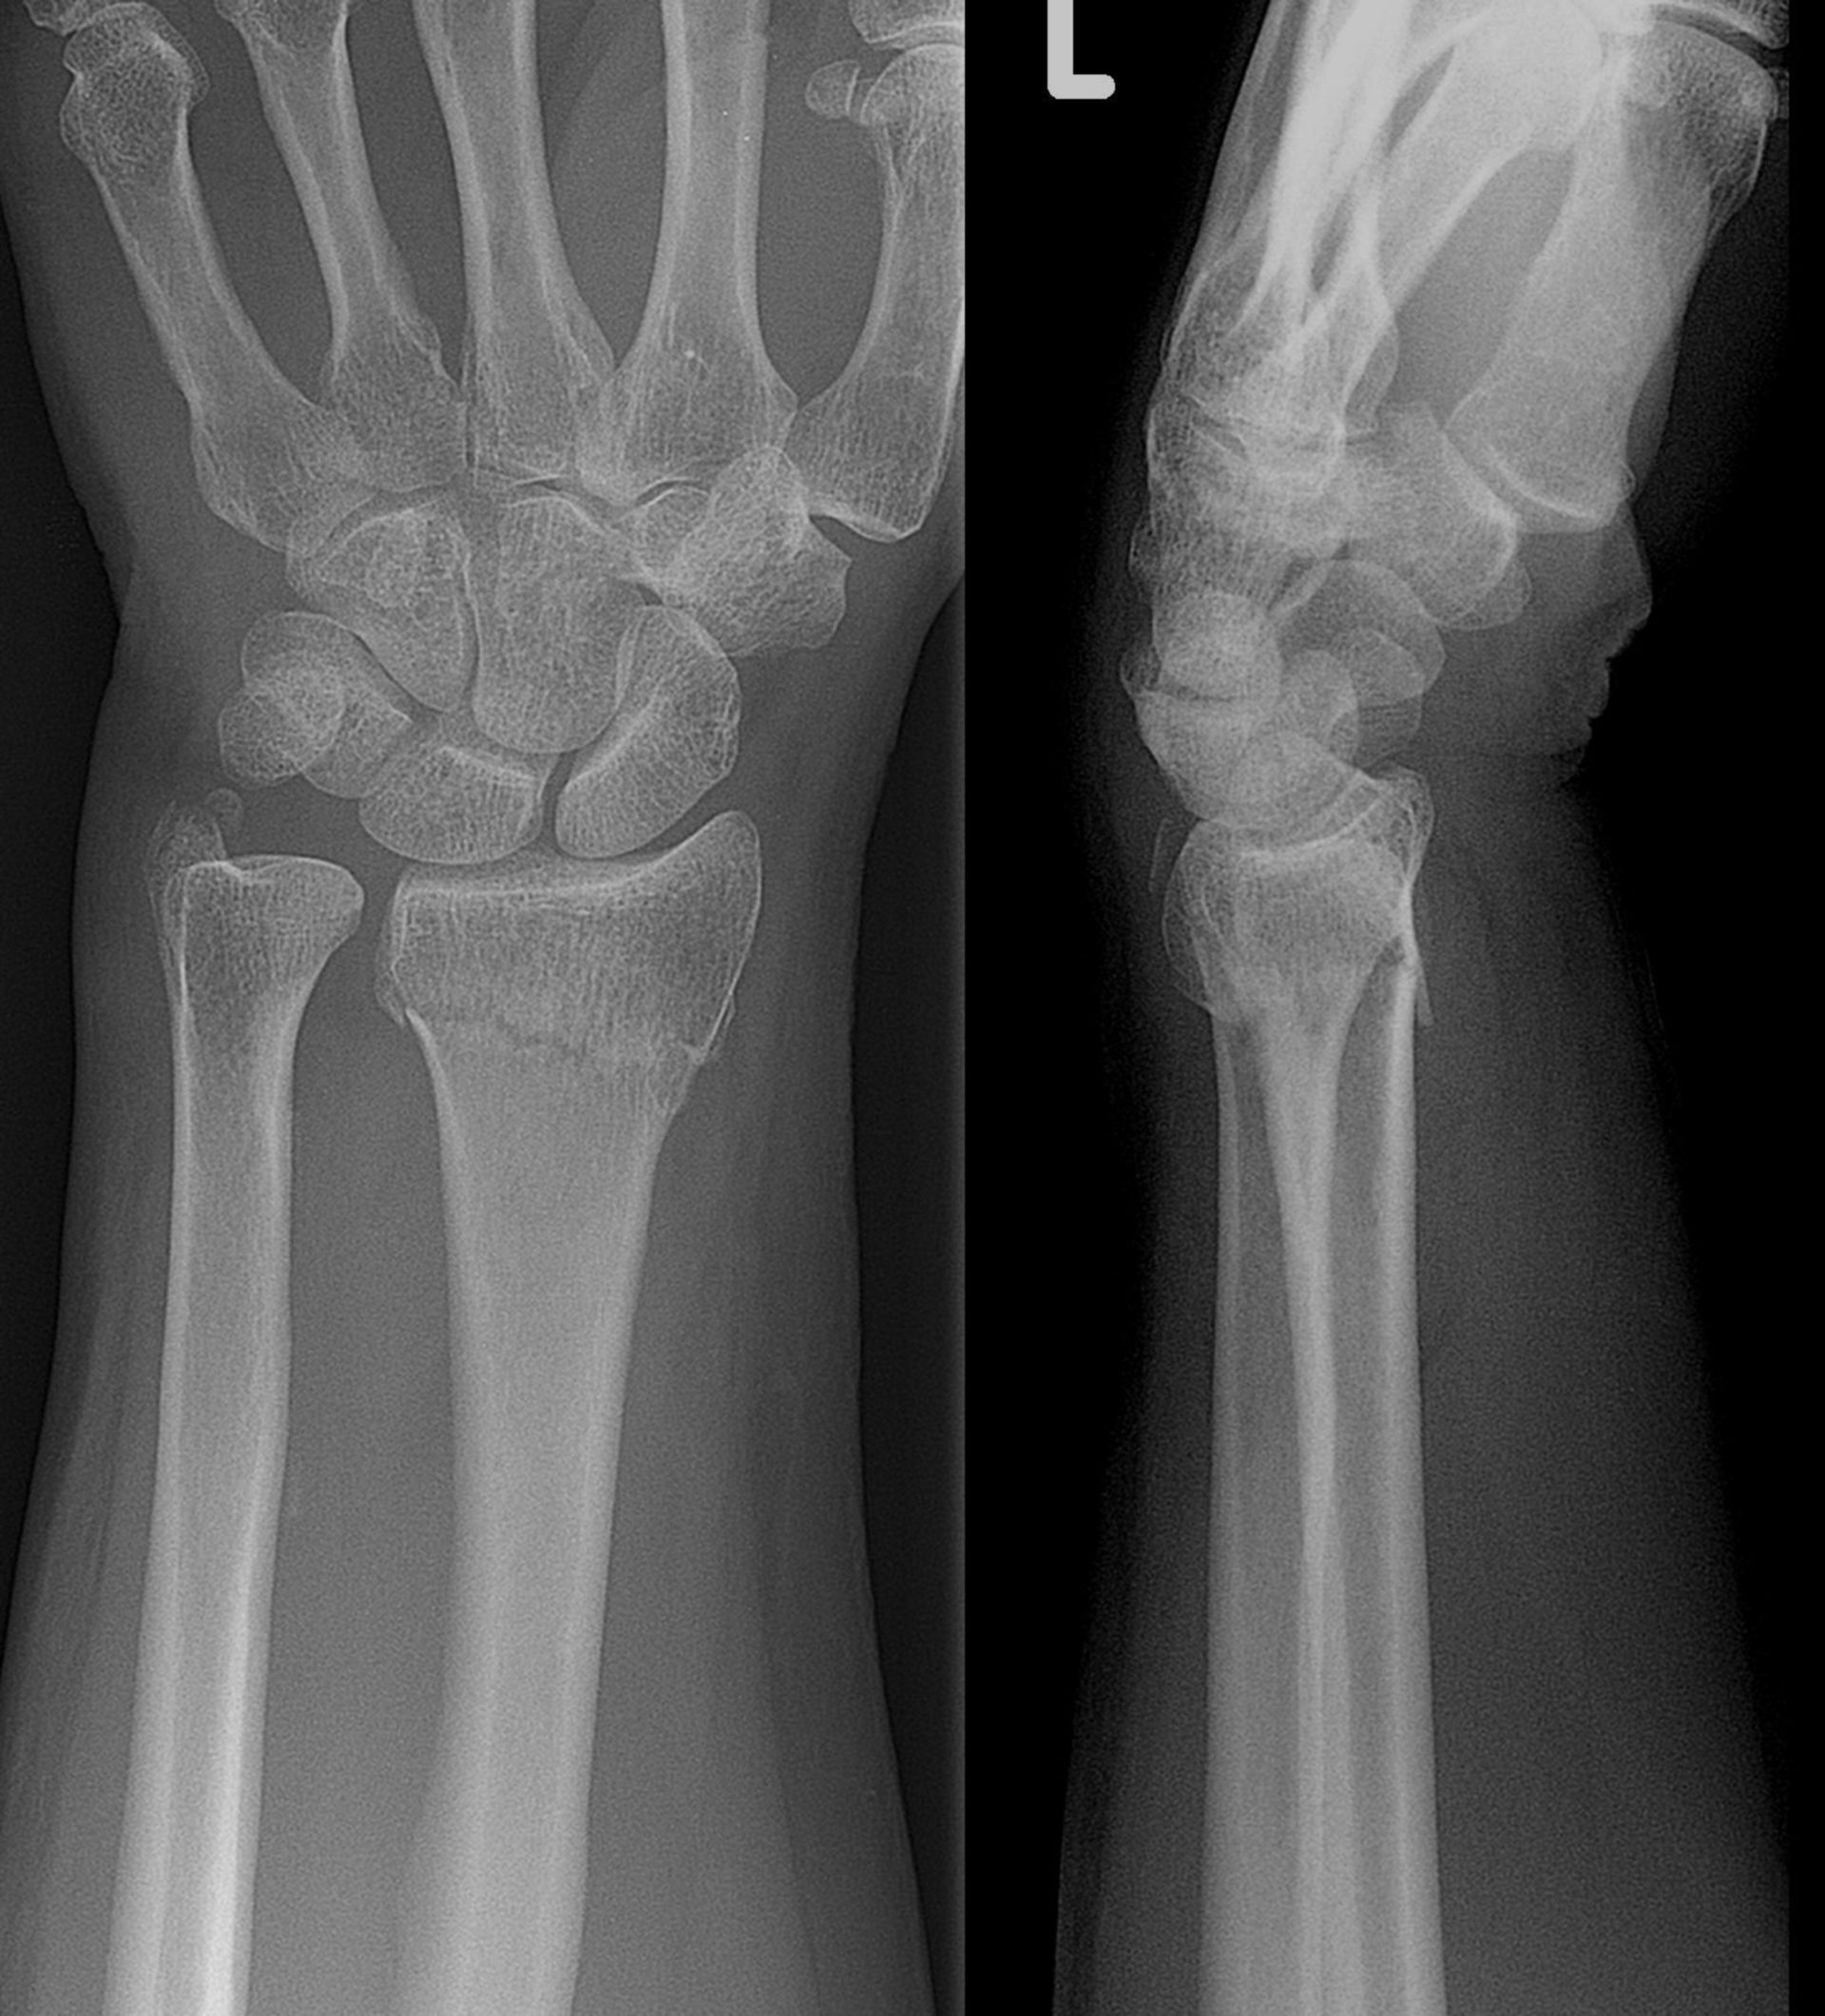 X-ray of a collesfracture of the left wrist